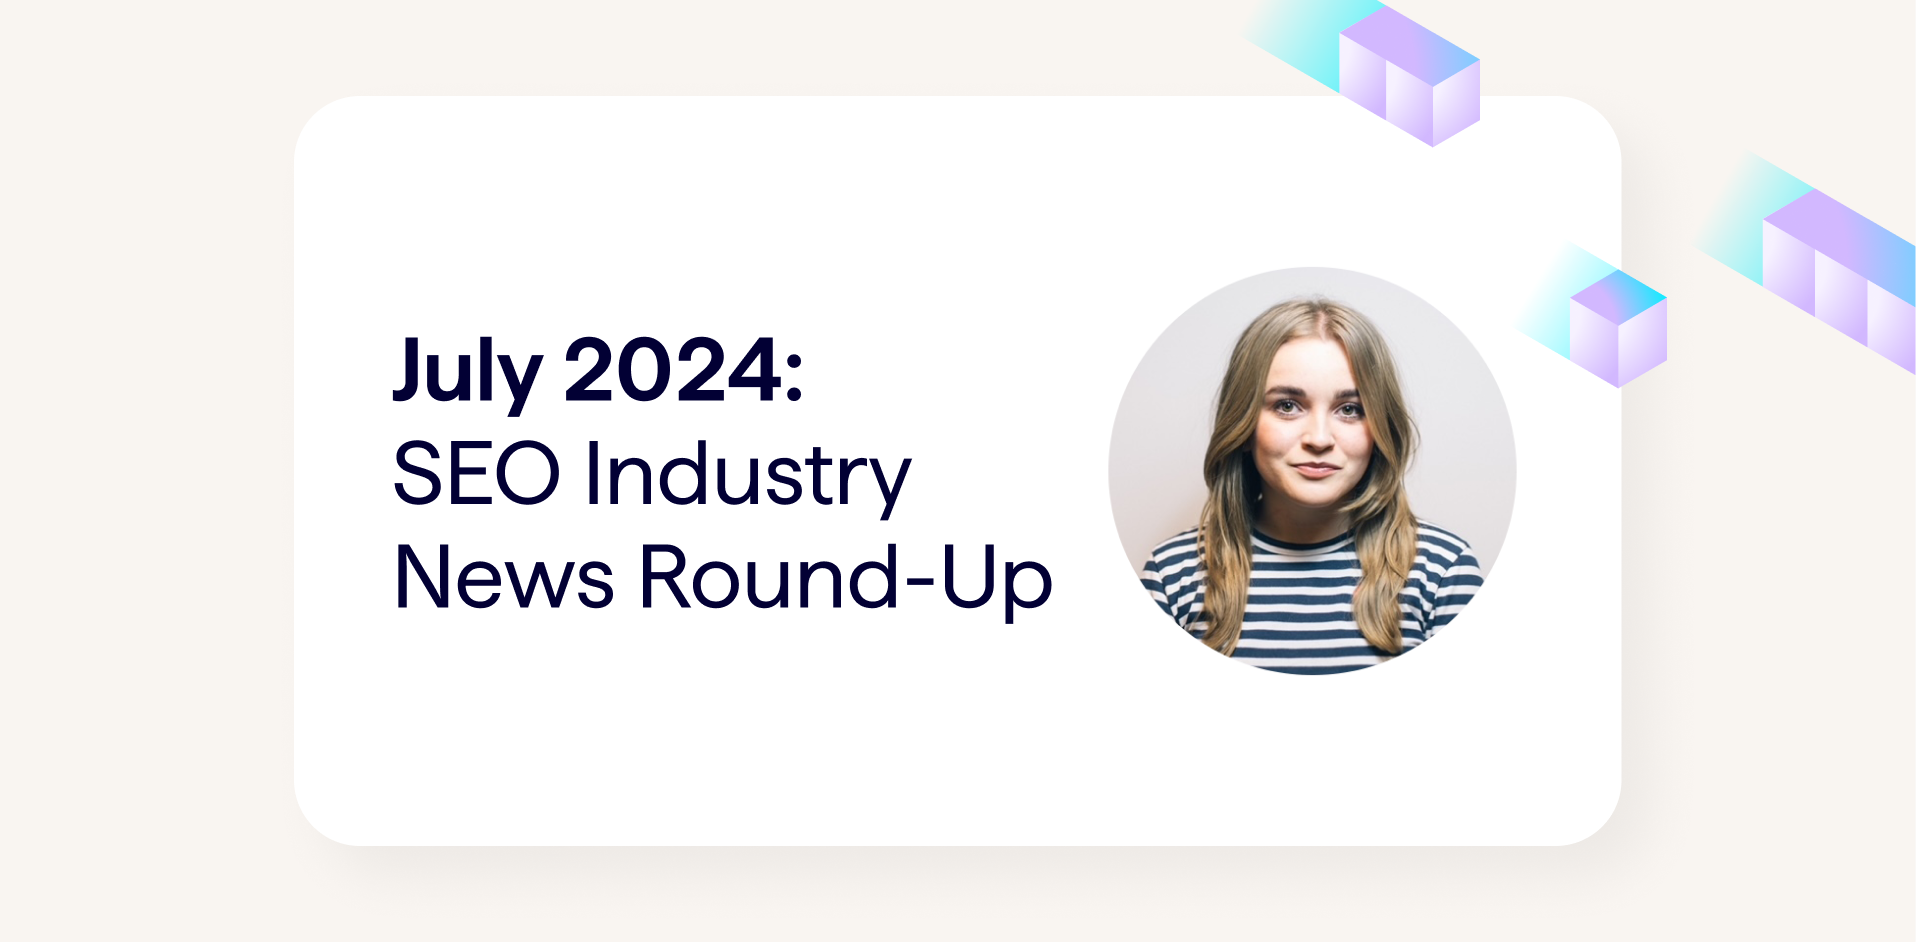 July 2024 - SEO Industry News Round-Up. Banner image shows author photo for Senior Technical SEO Natalie Stubbs, of Lumar.